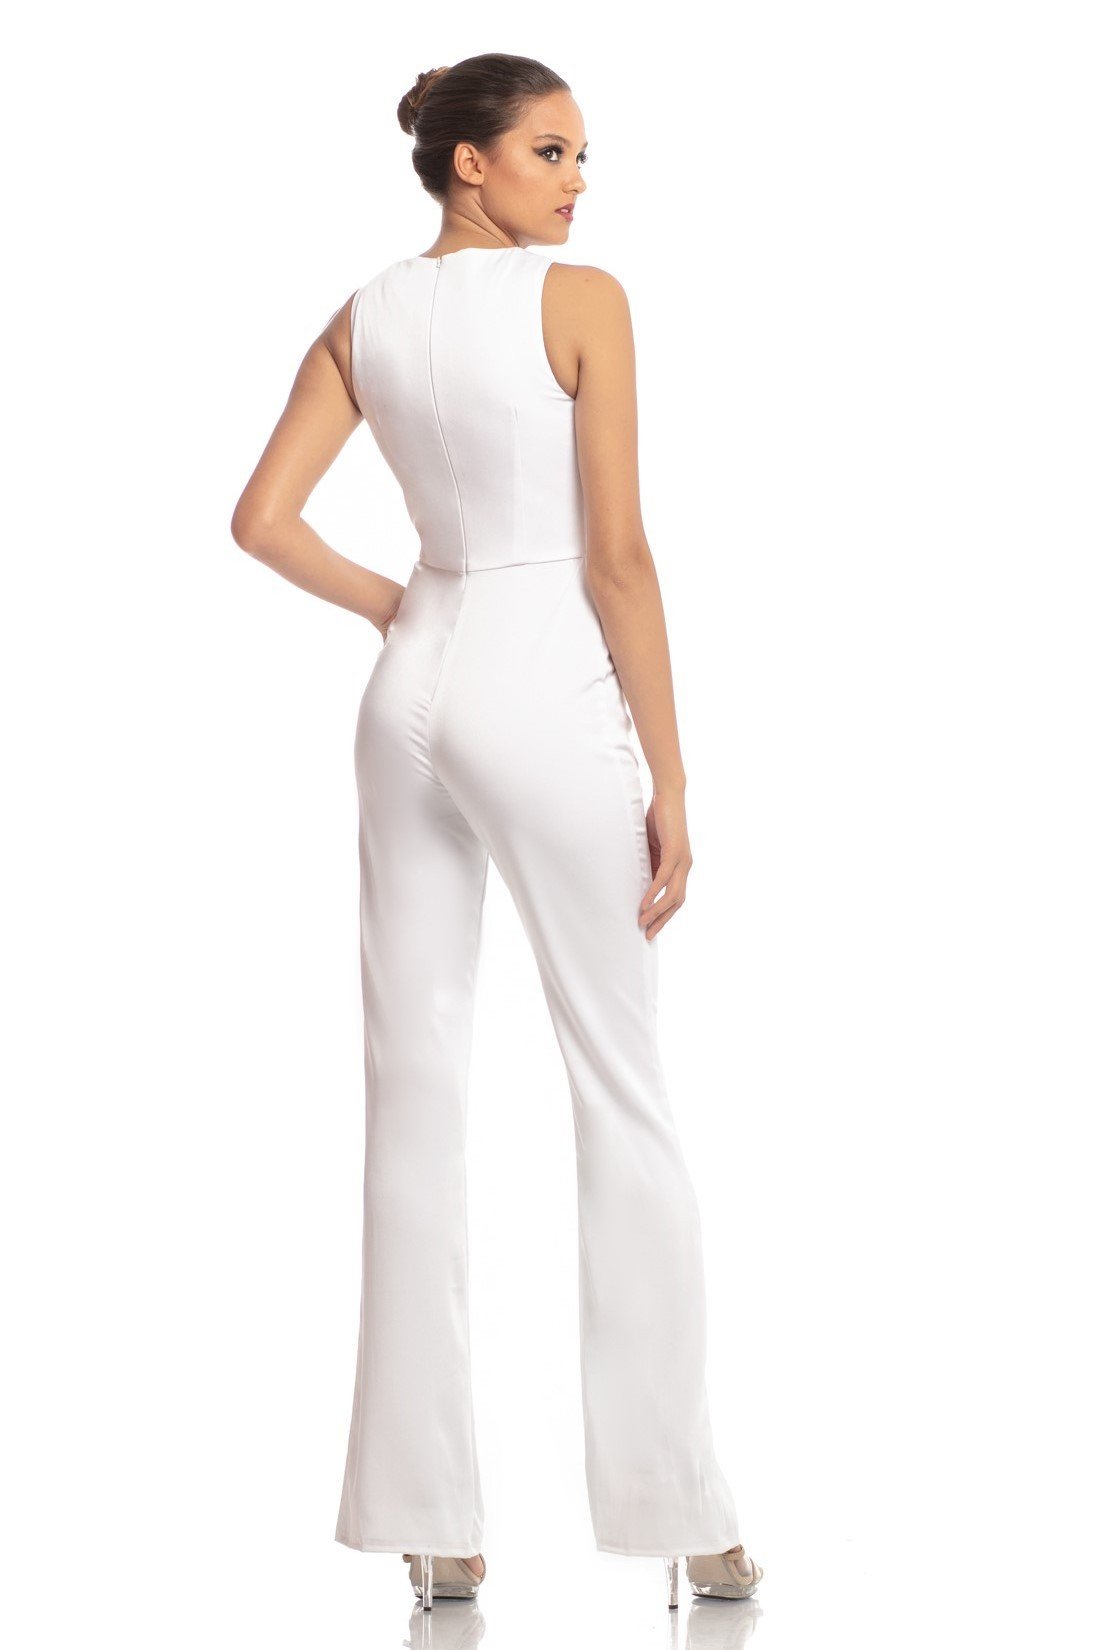 Johnathan Kayne - 9083 Sleeveless Jewel Neck Jumpsuit With Cape Detail In White